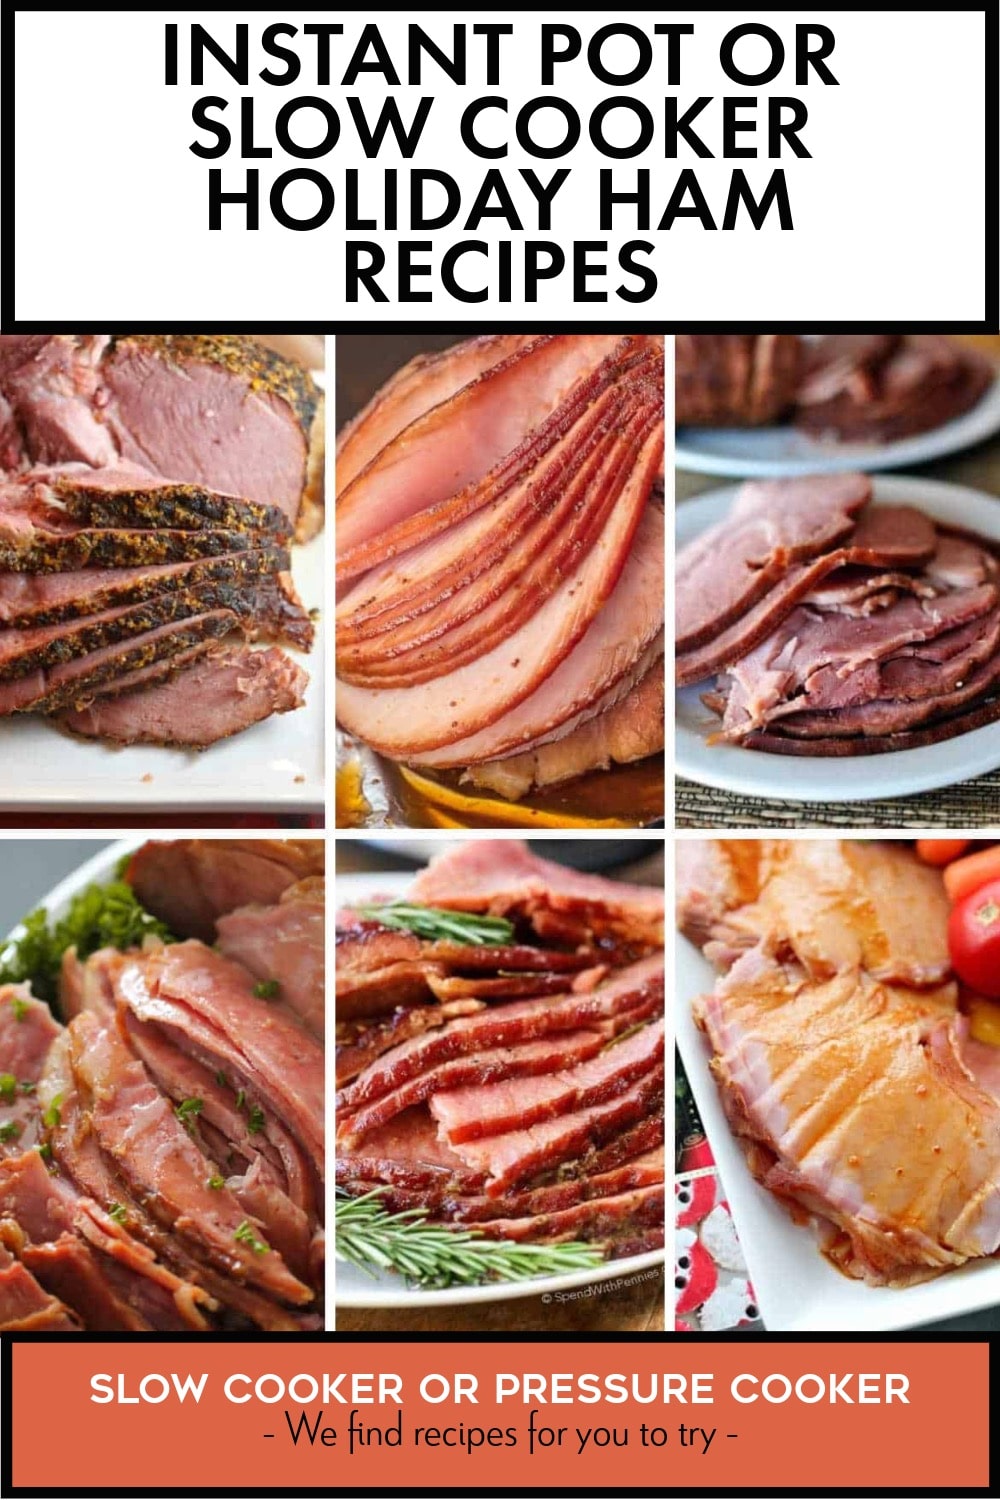 Pinterest image of Instant Pot or Slow Cooker Holiday Ham Recipes